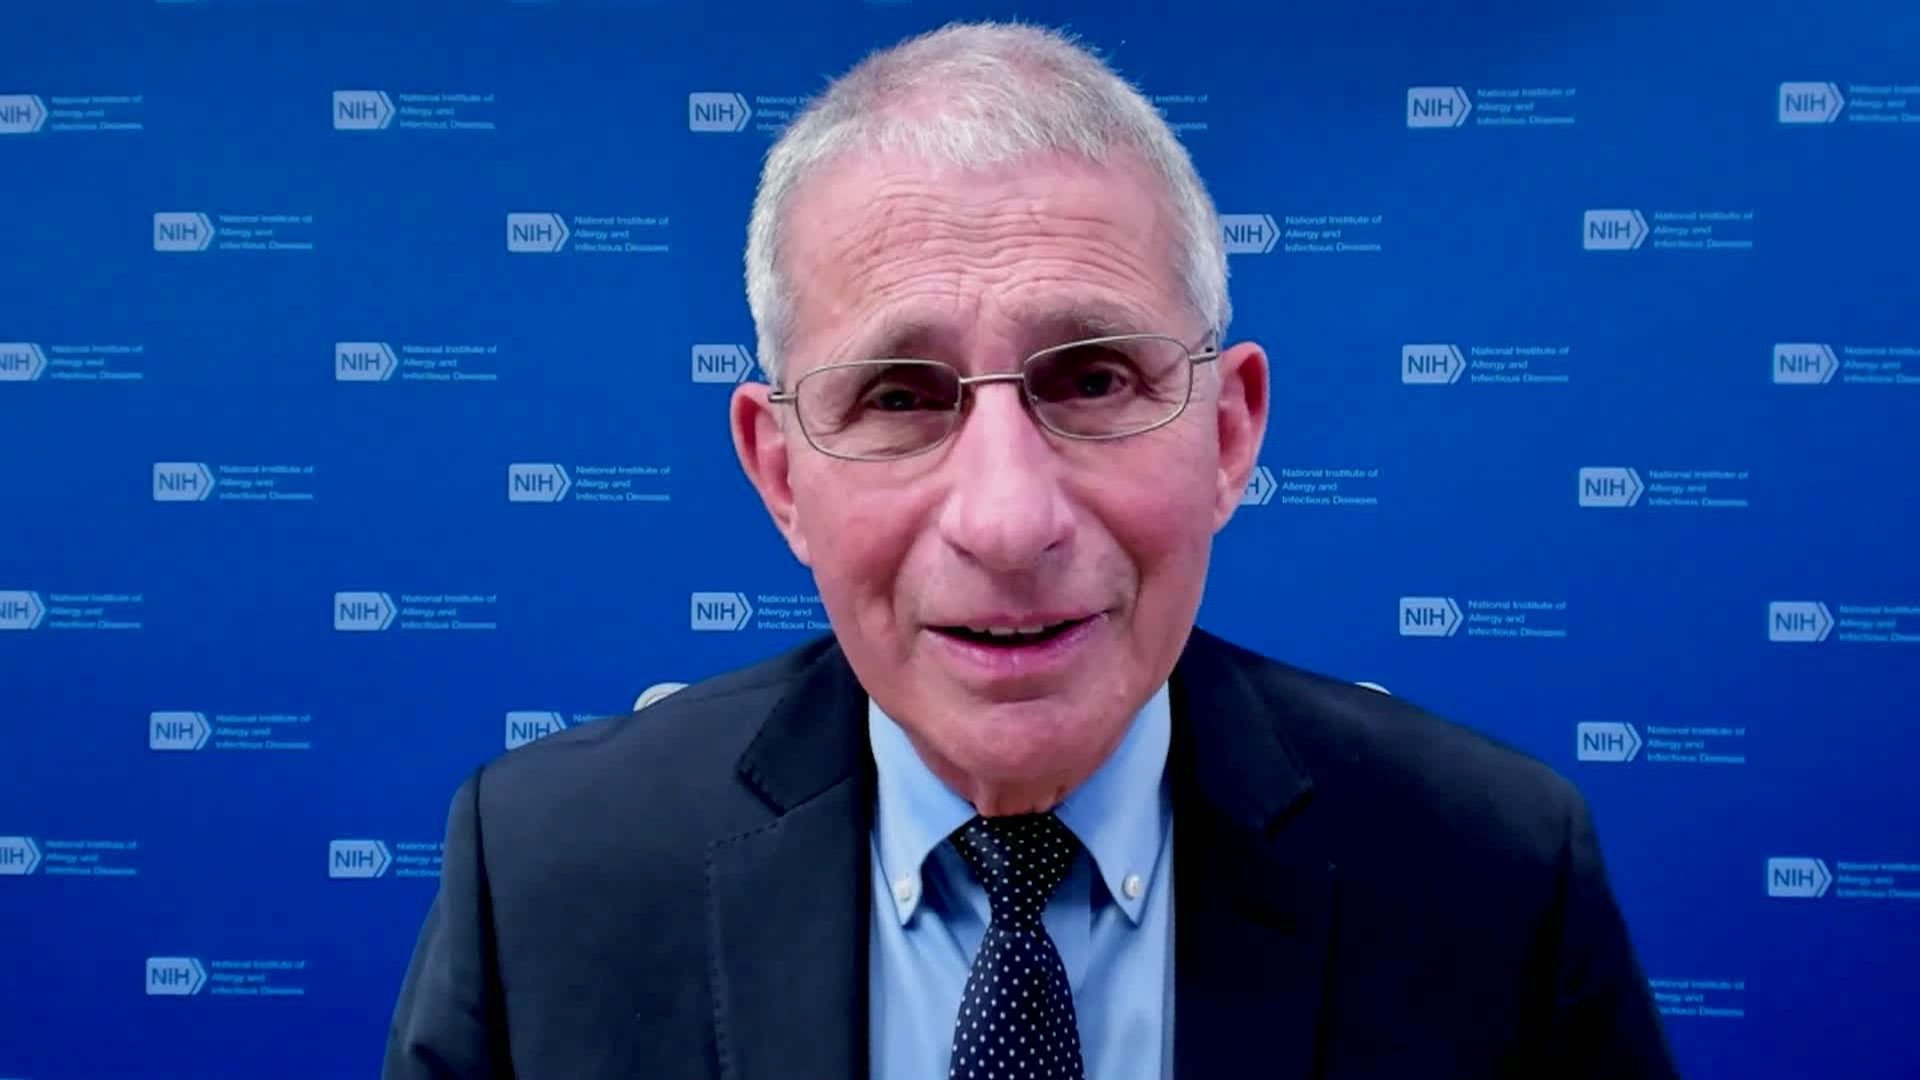 Fauci, the top infectious disease expert in the United States: Herd immunity requires 90% of people in the United States to be vaccinated.